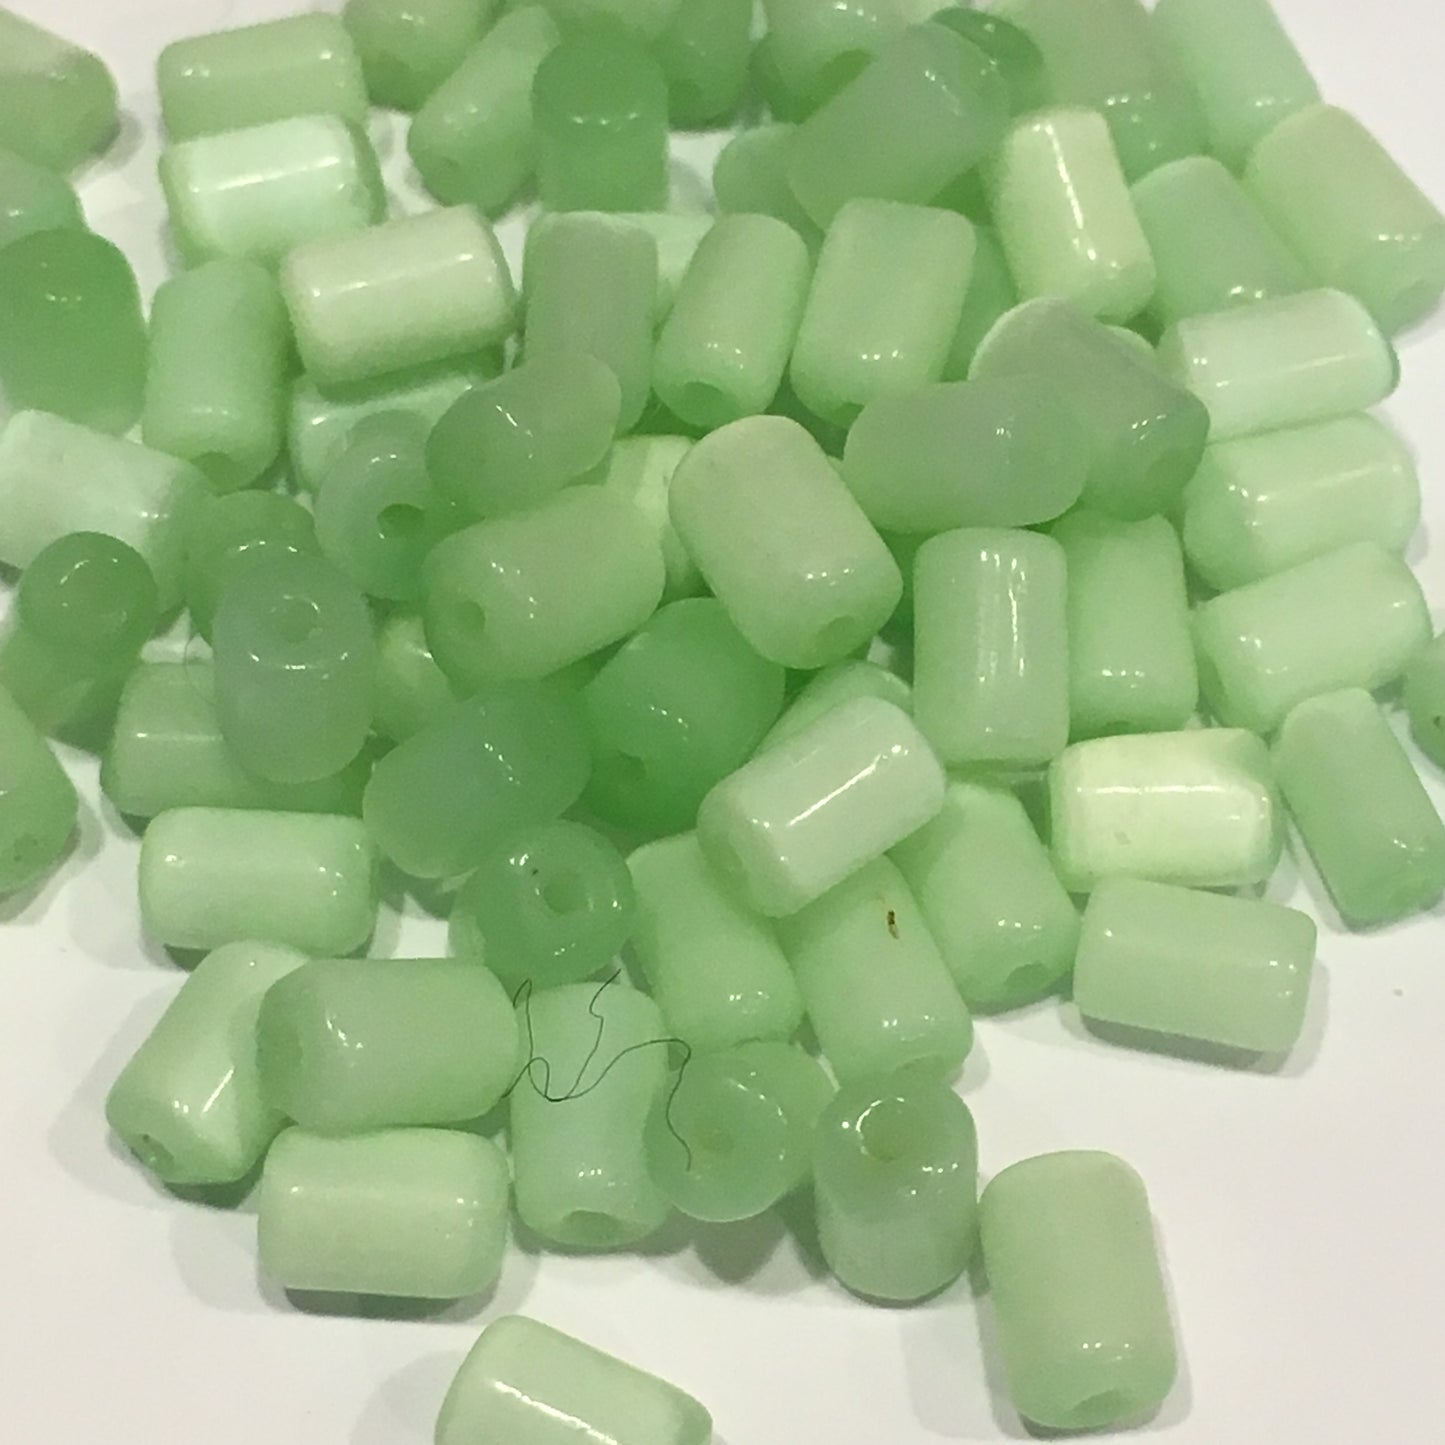 Light Green Painted Glass Tube Beads, Average Size 8 x 5 mm, 85 Beads